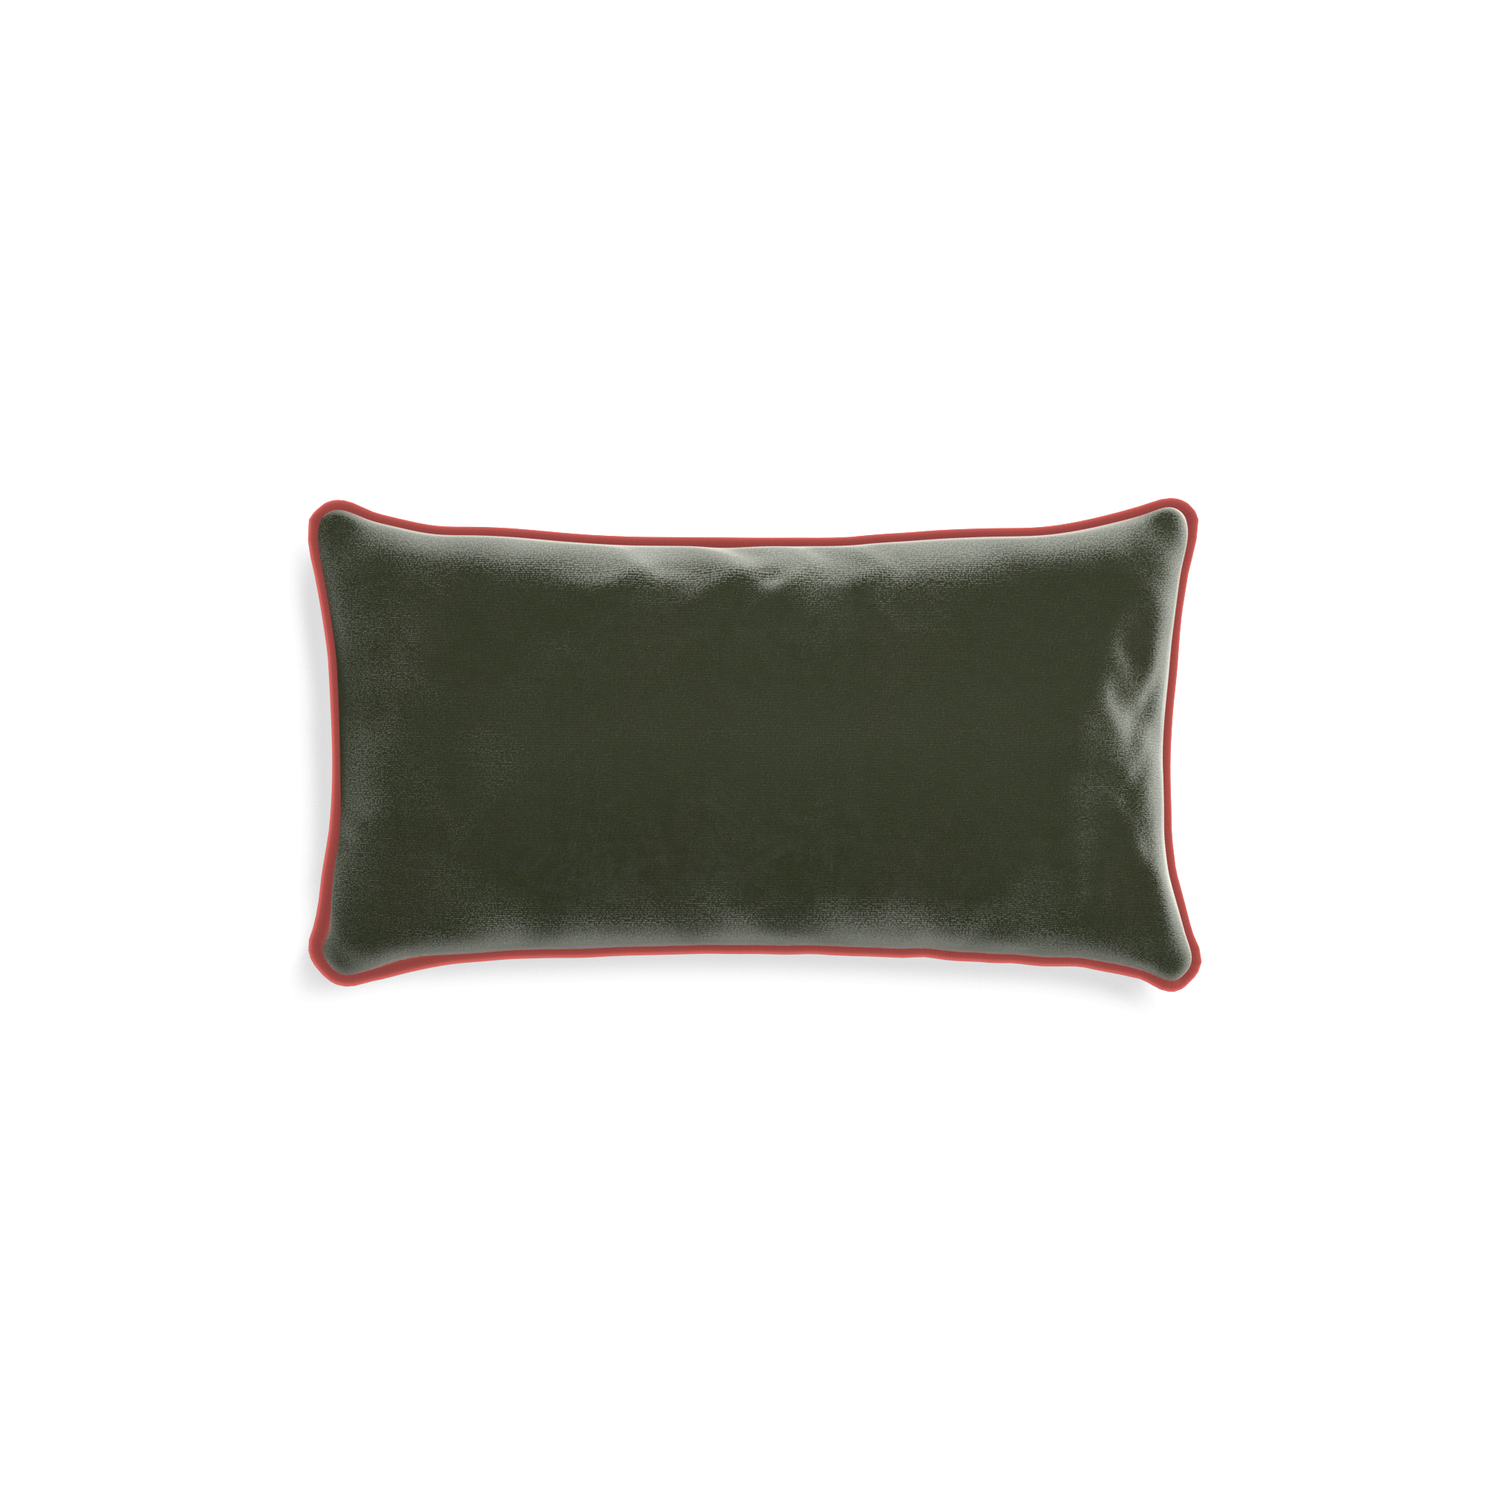 rectangle fern green velvet pillow with coral piping